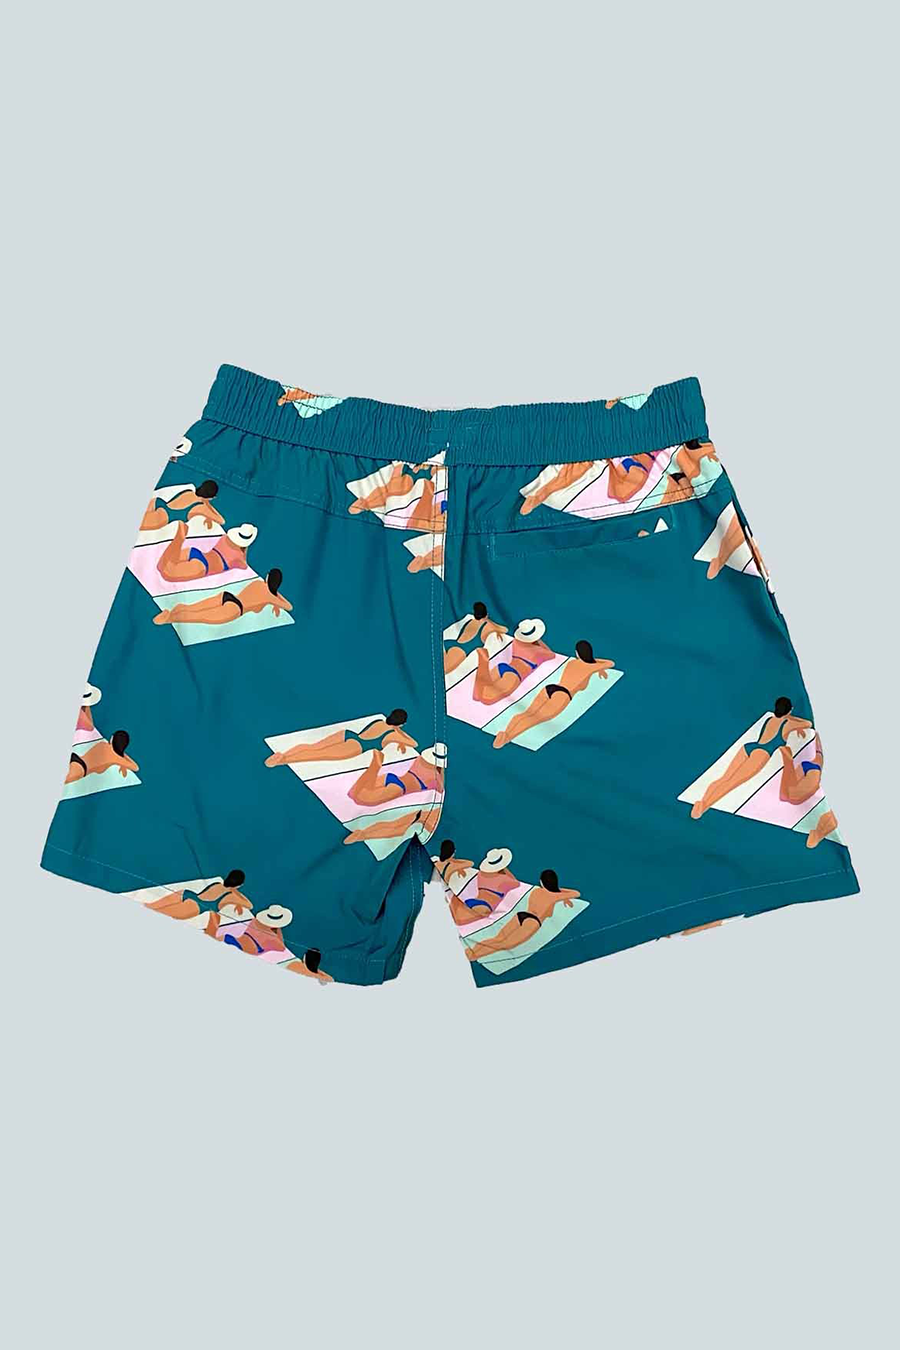 Tanning Co Short | Teal - West of Camden - Main Image Number 2 of 2